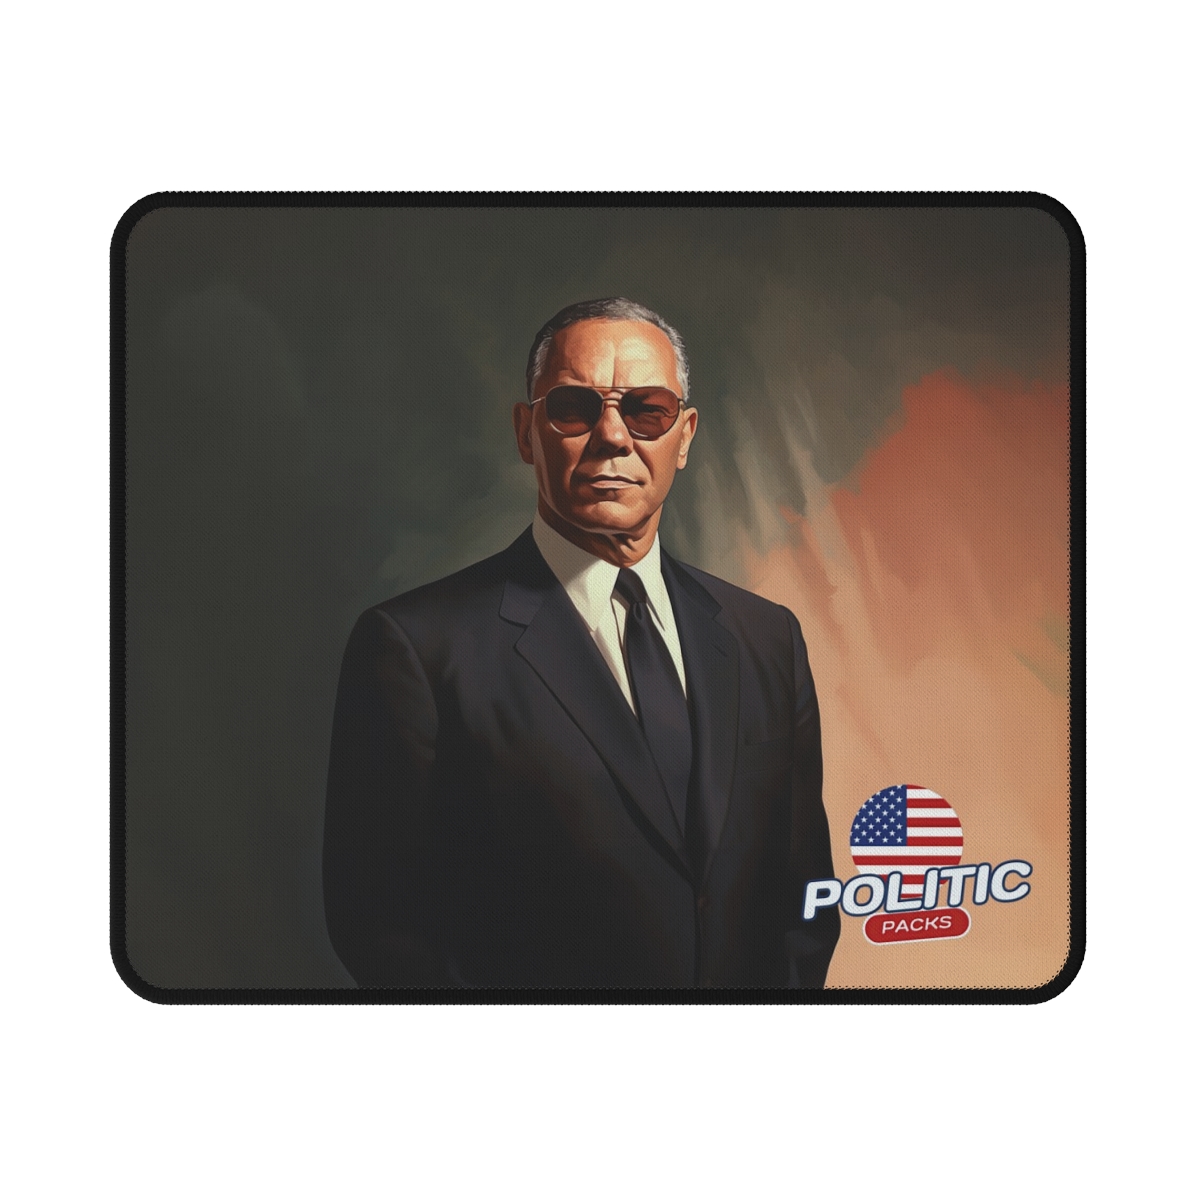 Colin Powell Legacy Mouse Pad – Politic Packs Edition